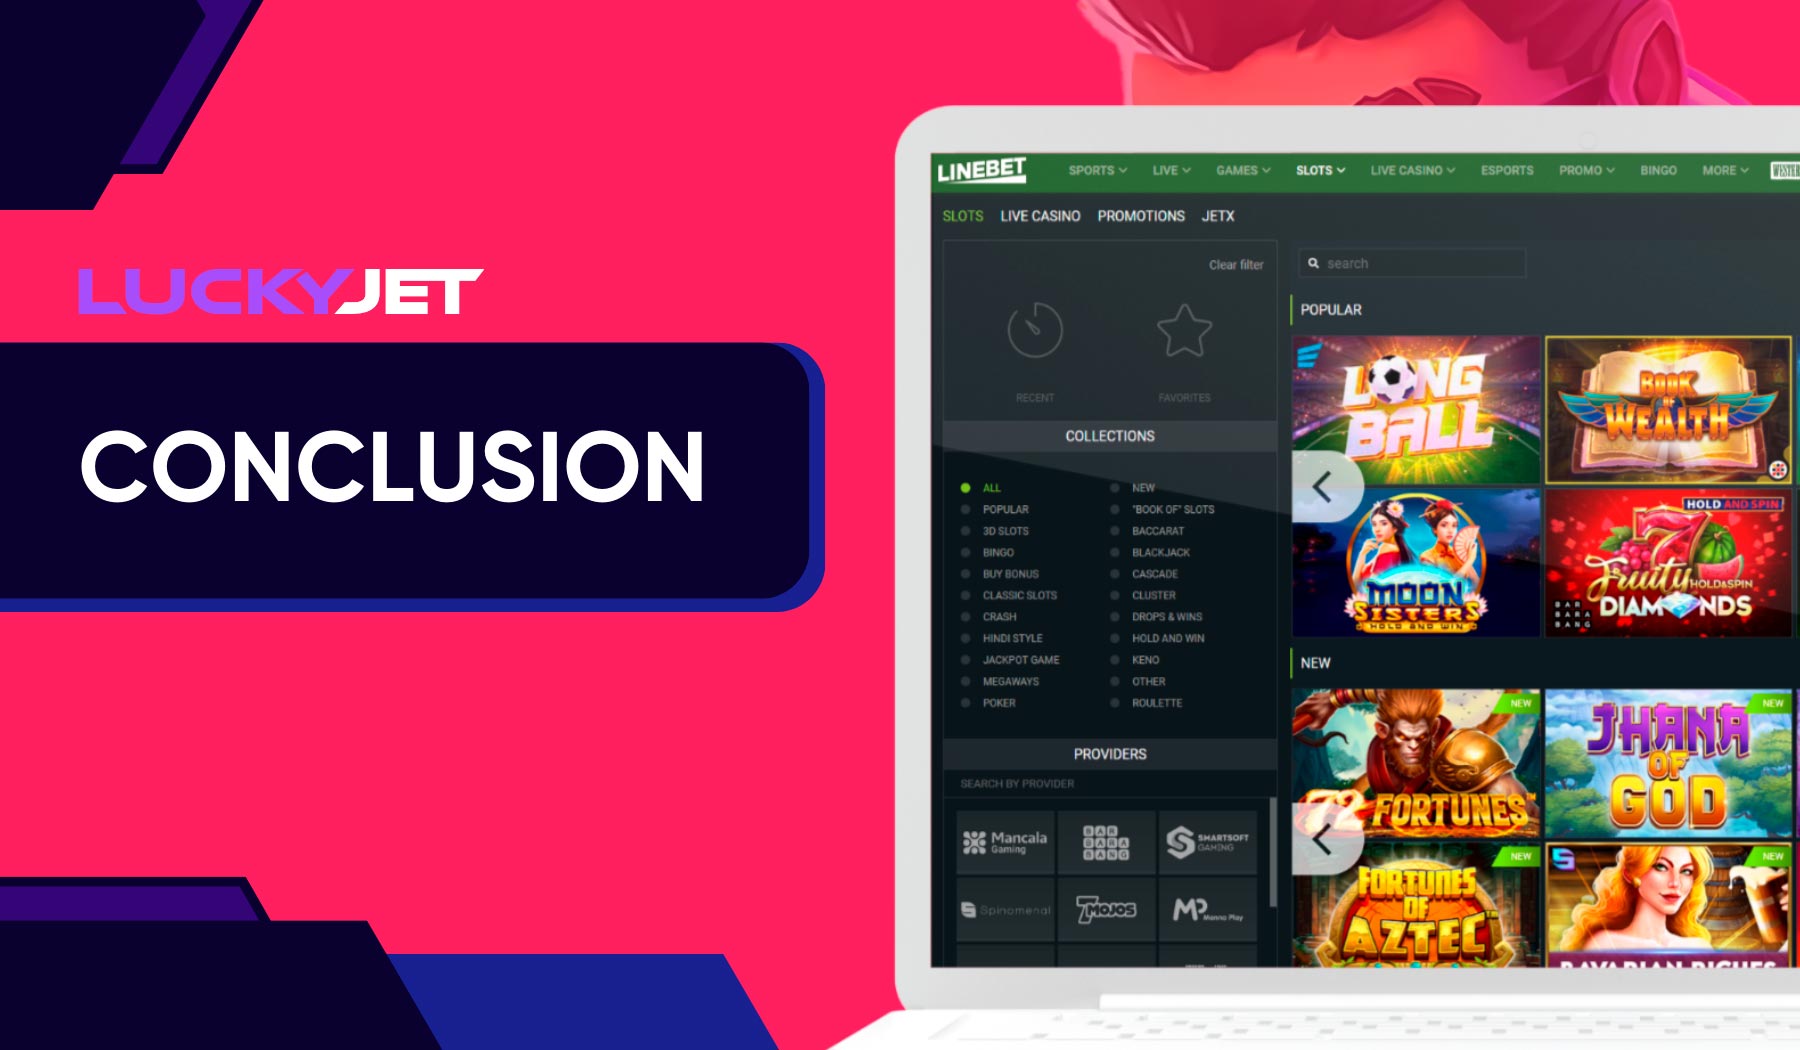 Lucky Jet slot by Linebet is an exciting gameplay